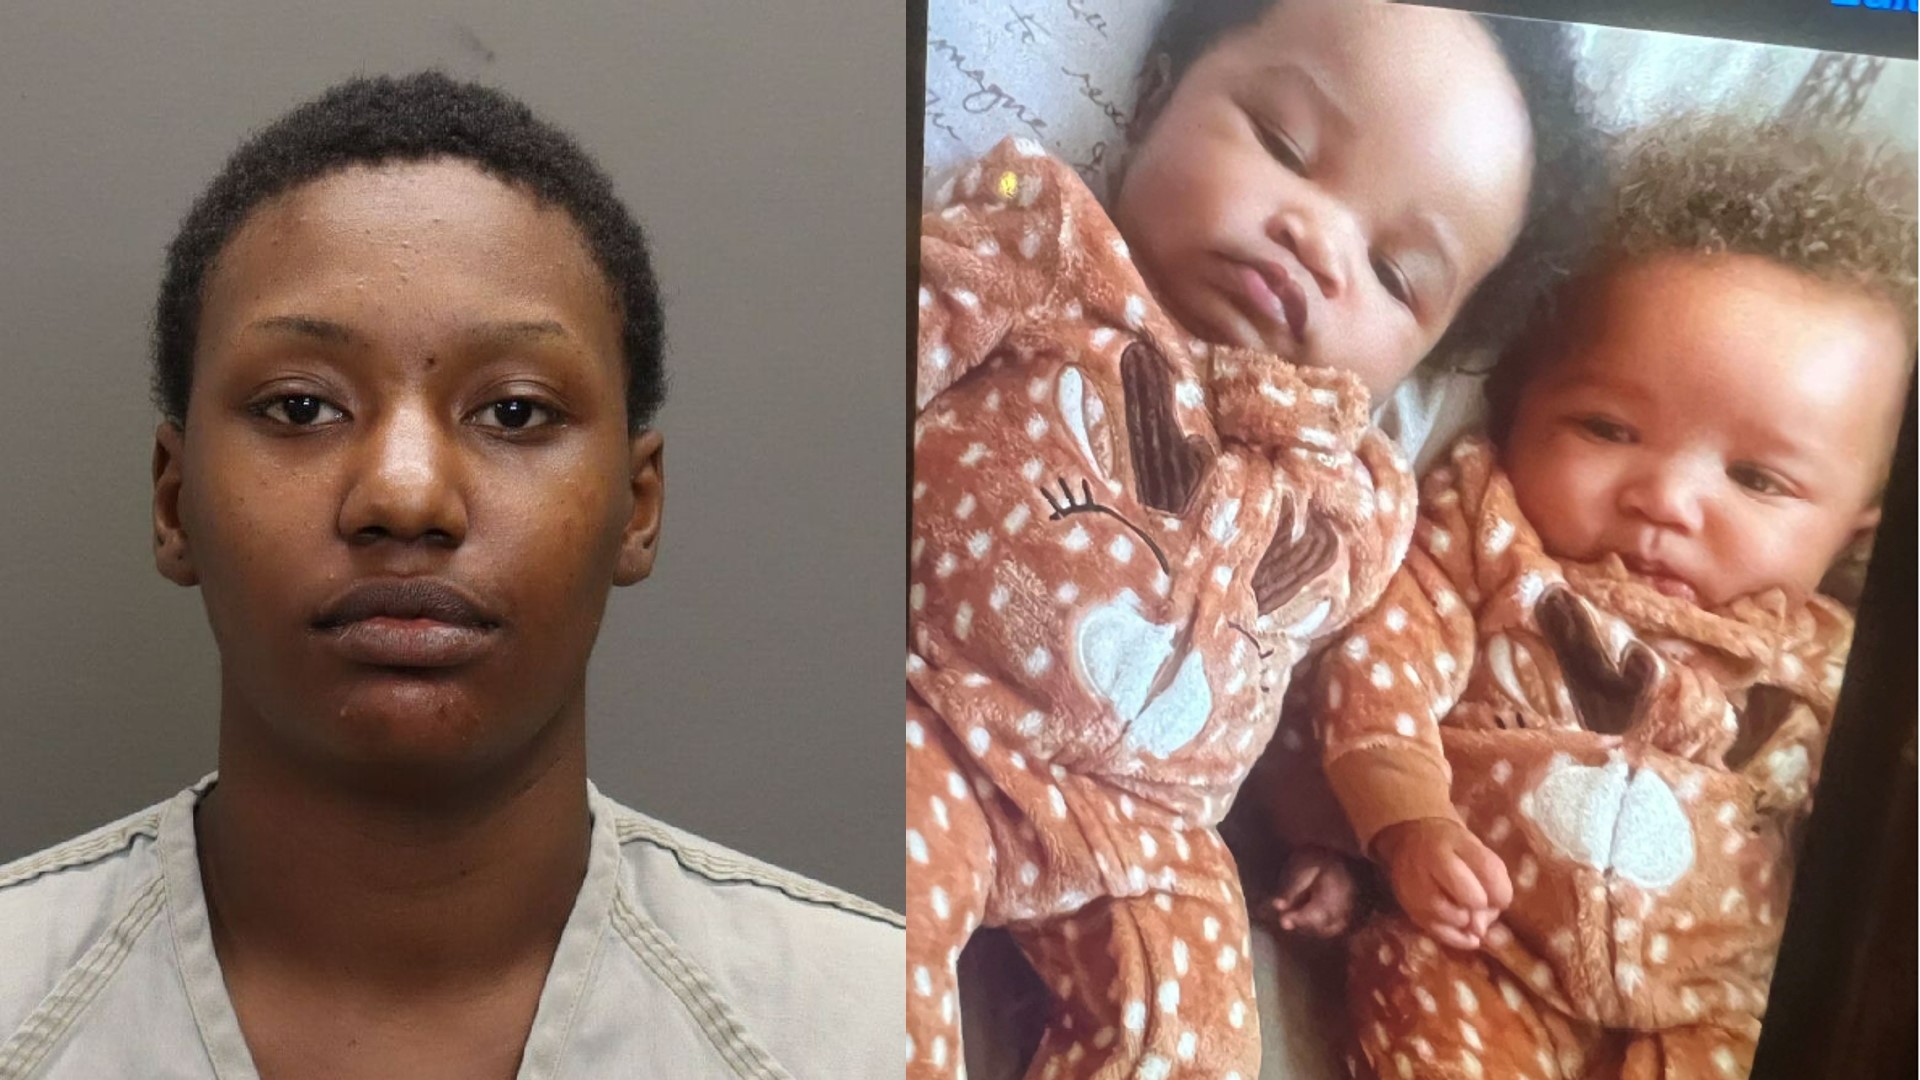 Columbus police provide an update on the search for a missing 5-month-old boy and the suspect connected to the AMBER Alert.